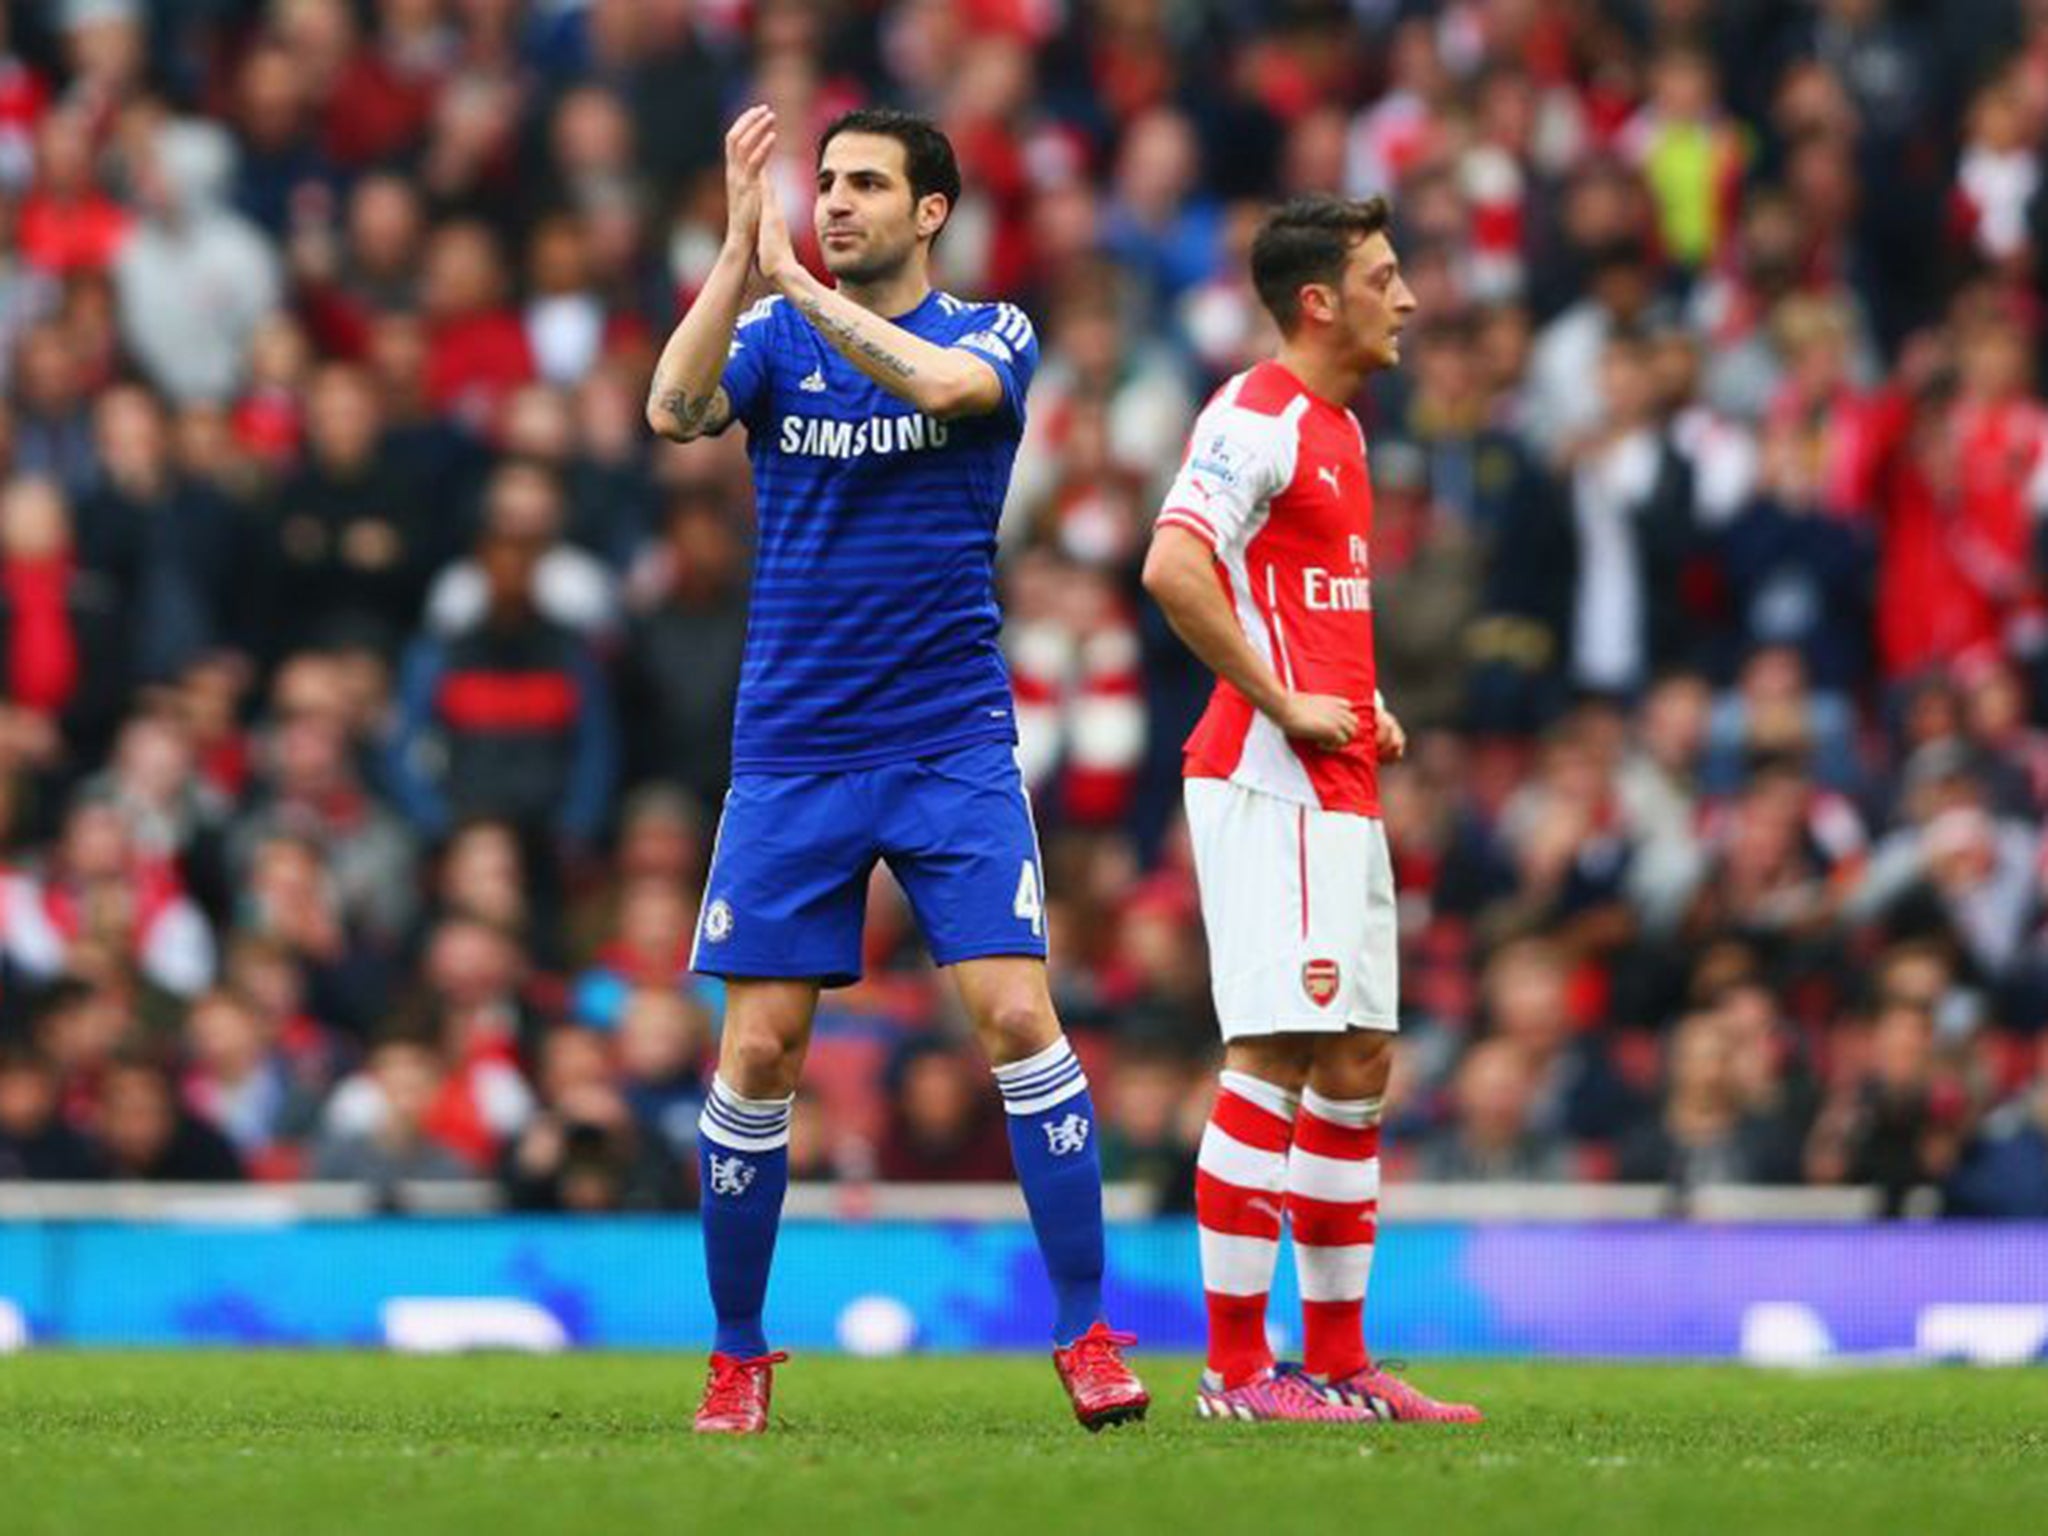 Cesc Fabregas was not named in the PFA Team of the Year (Getty)